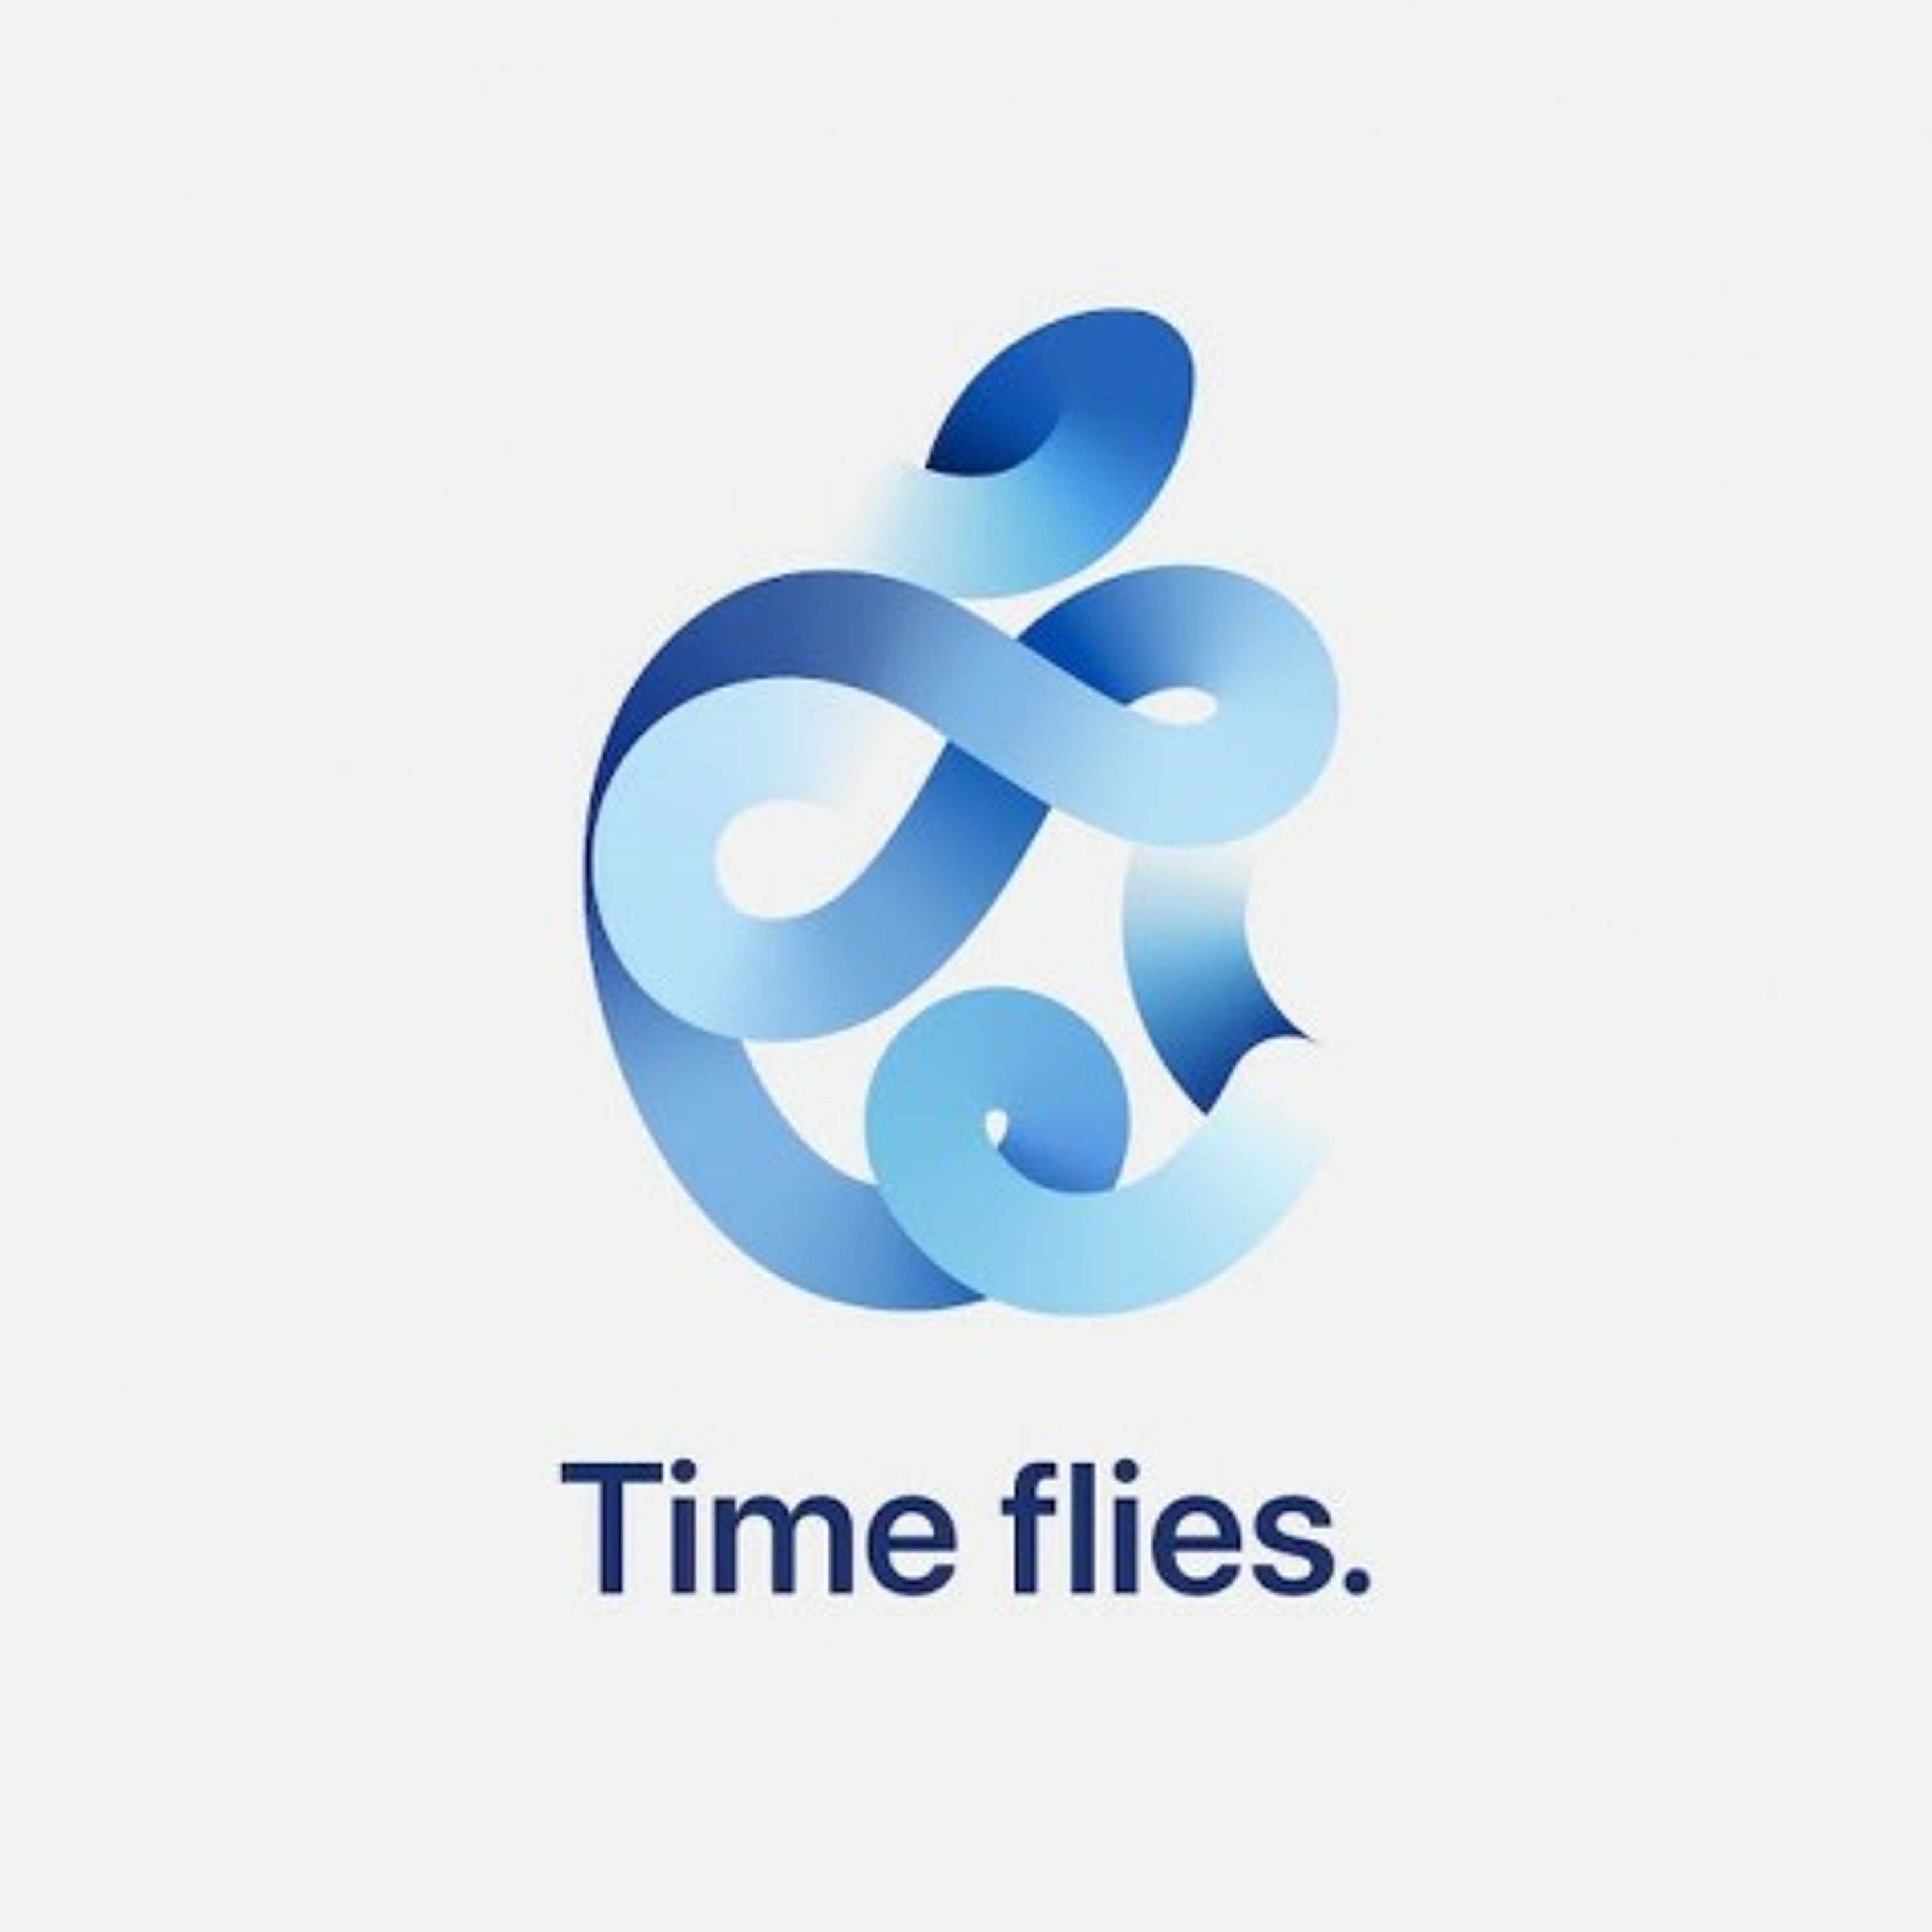 Thoughts On The Apple Time Flies 2020 Event